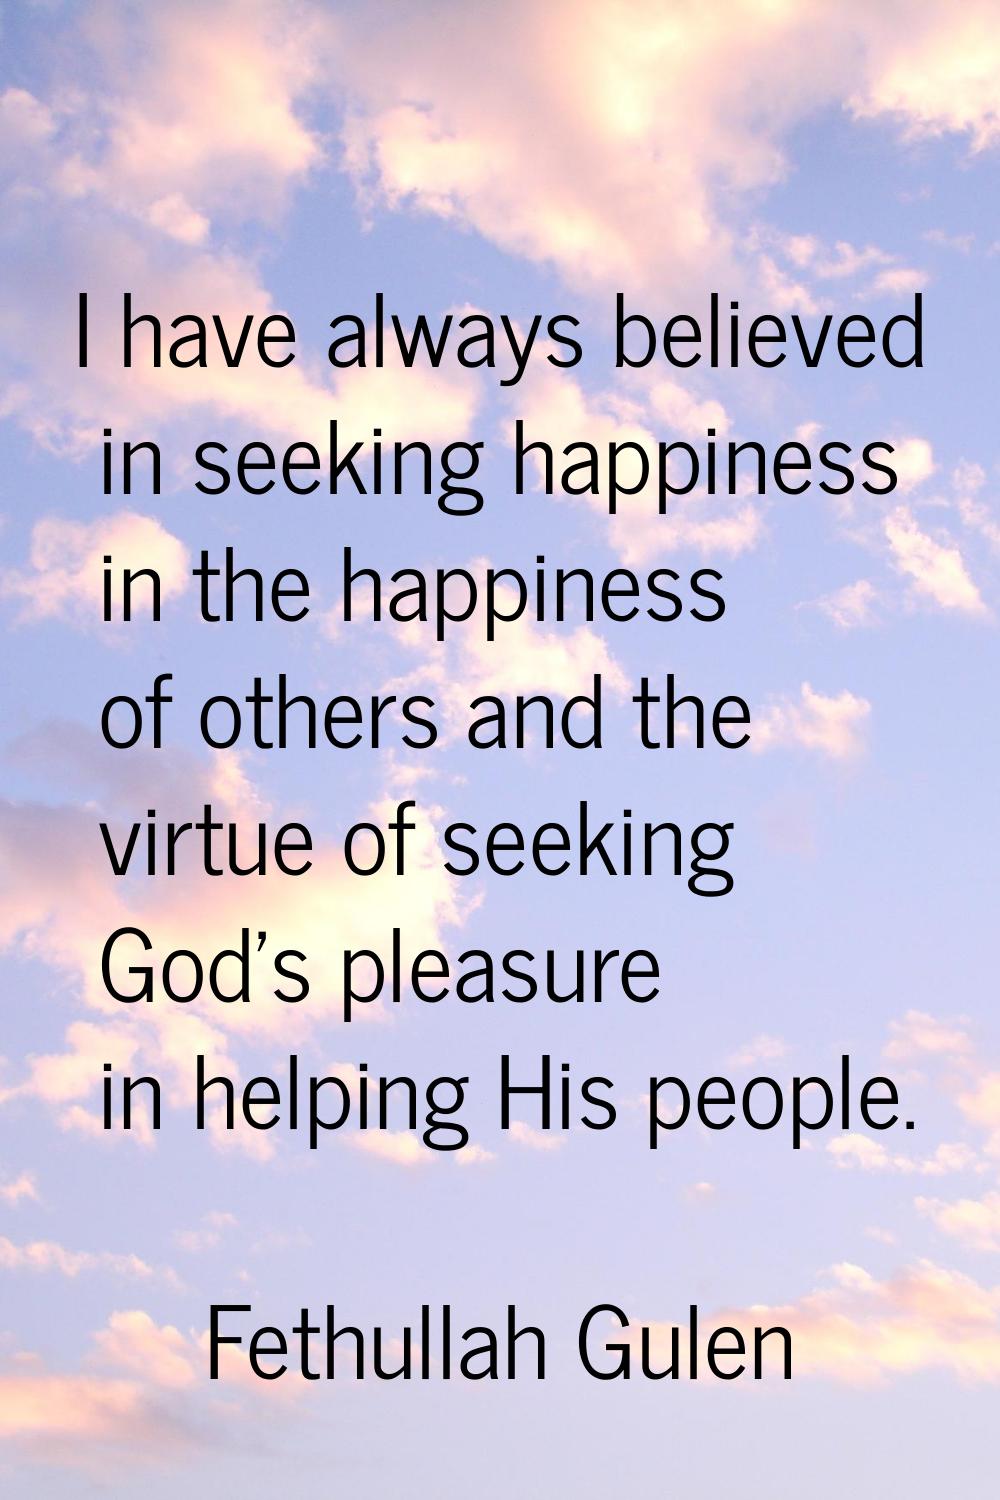 I have always believed in seeking happiness in the happiness of others and the virtue of seeking Go